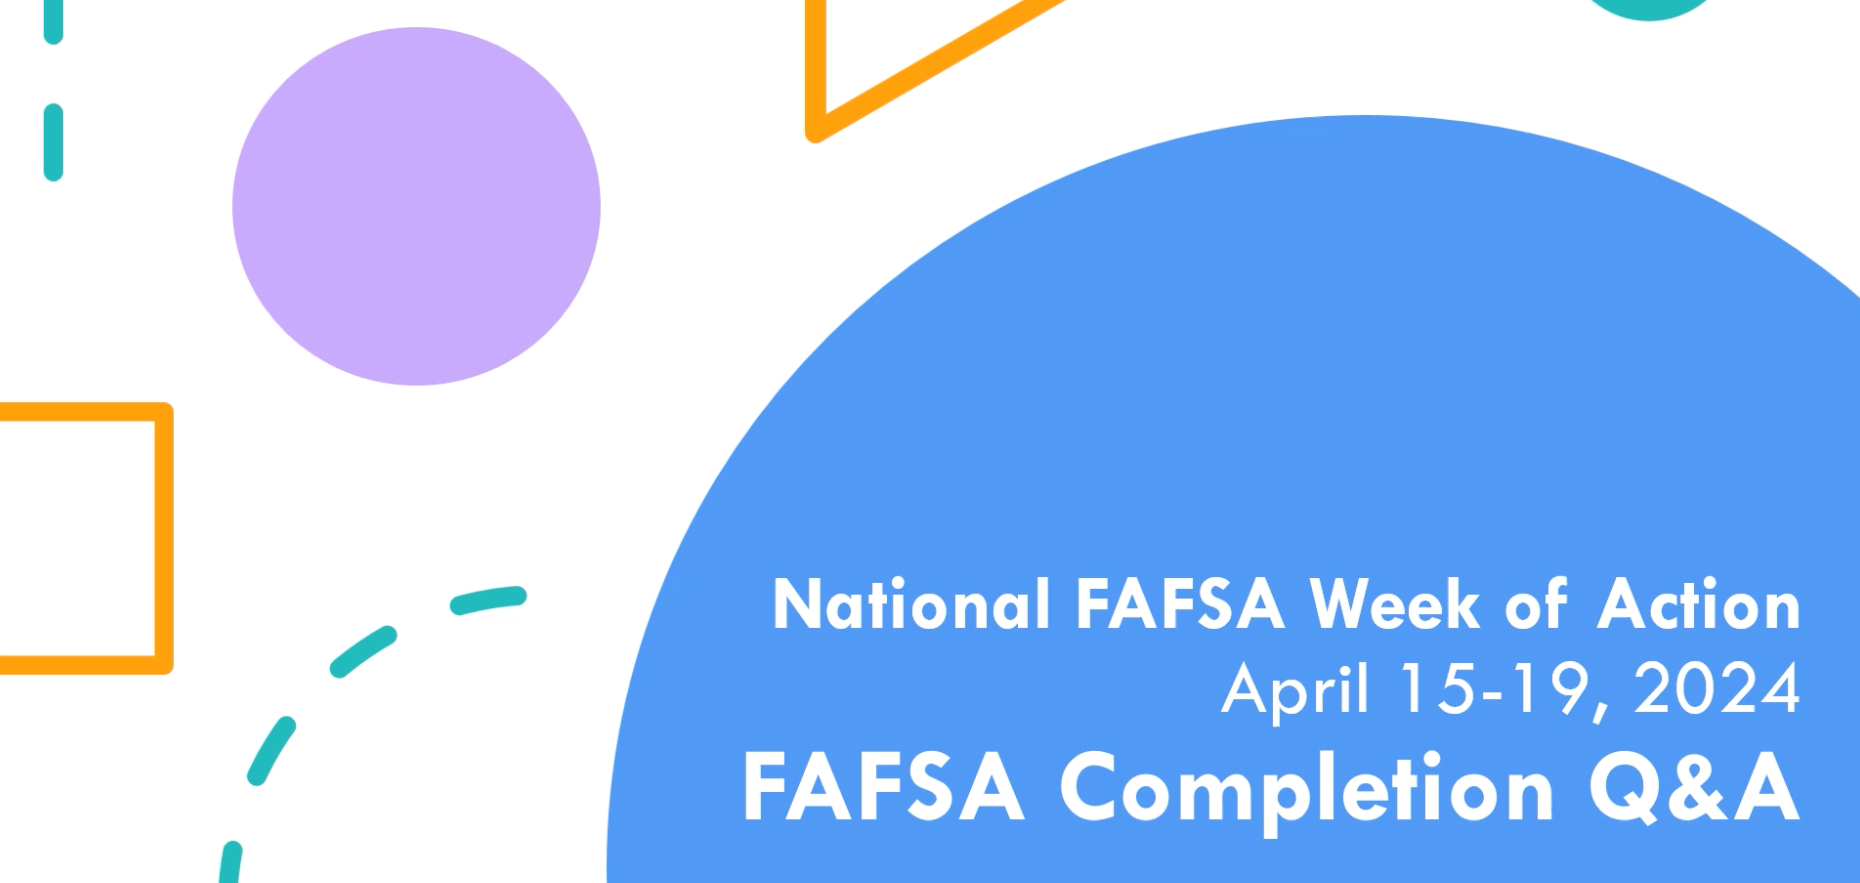 FAFSA week of action powerpoint title slide.